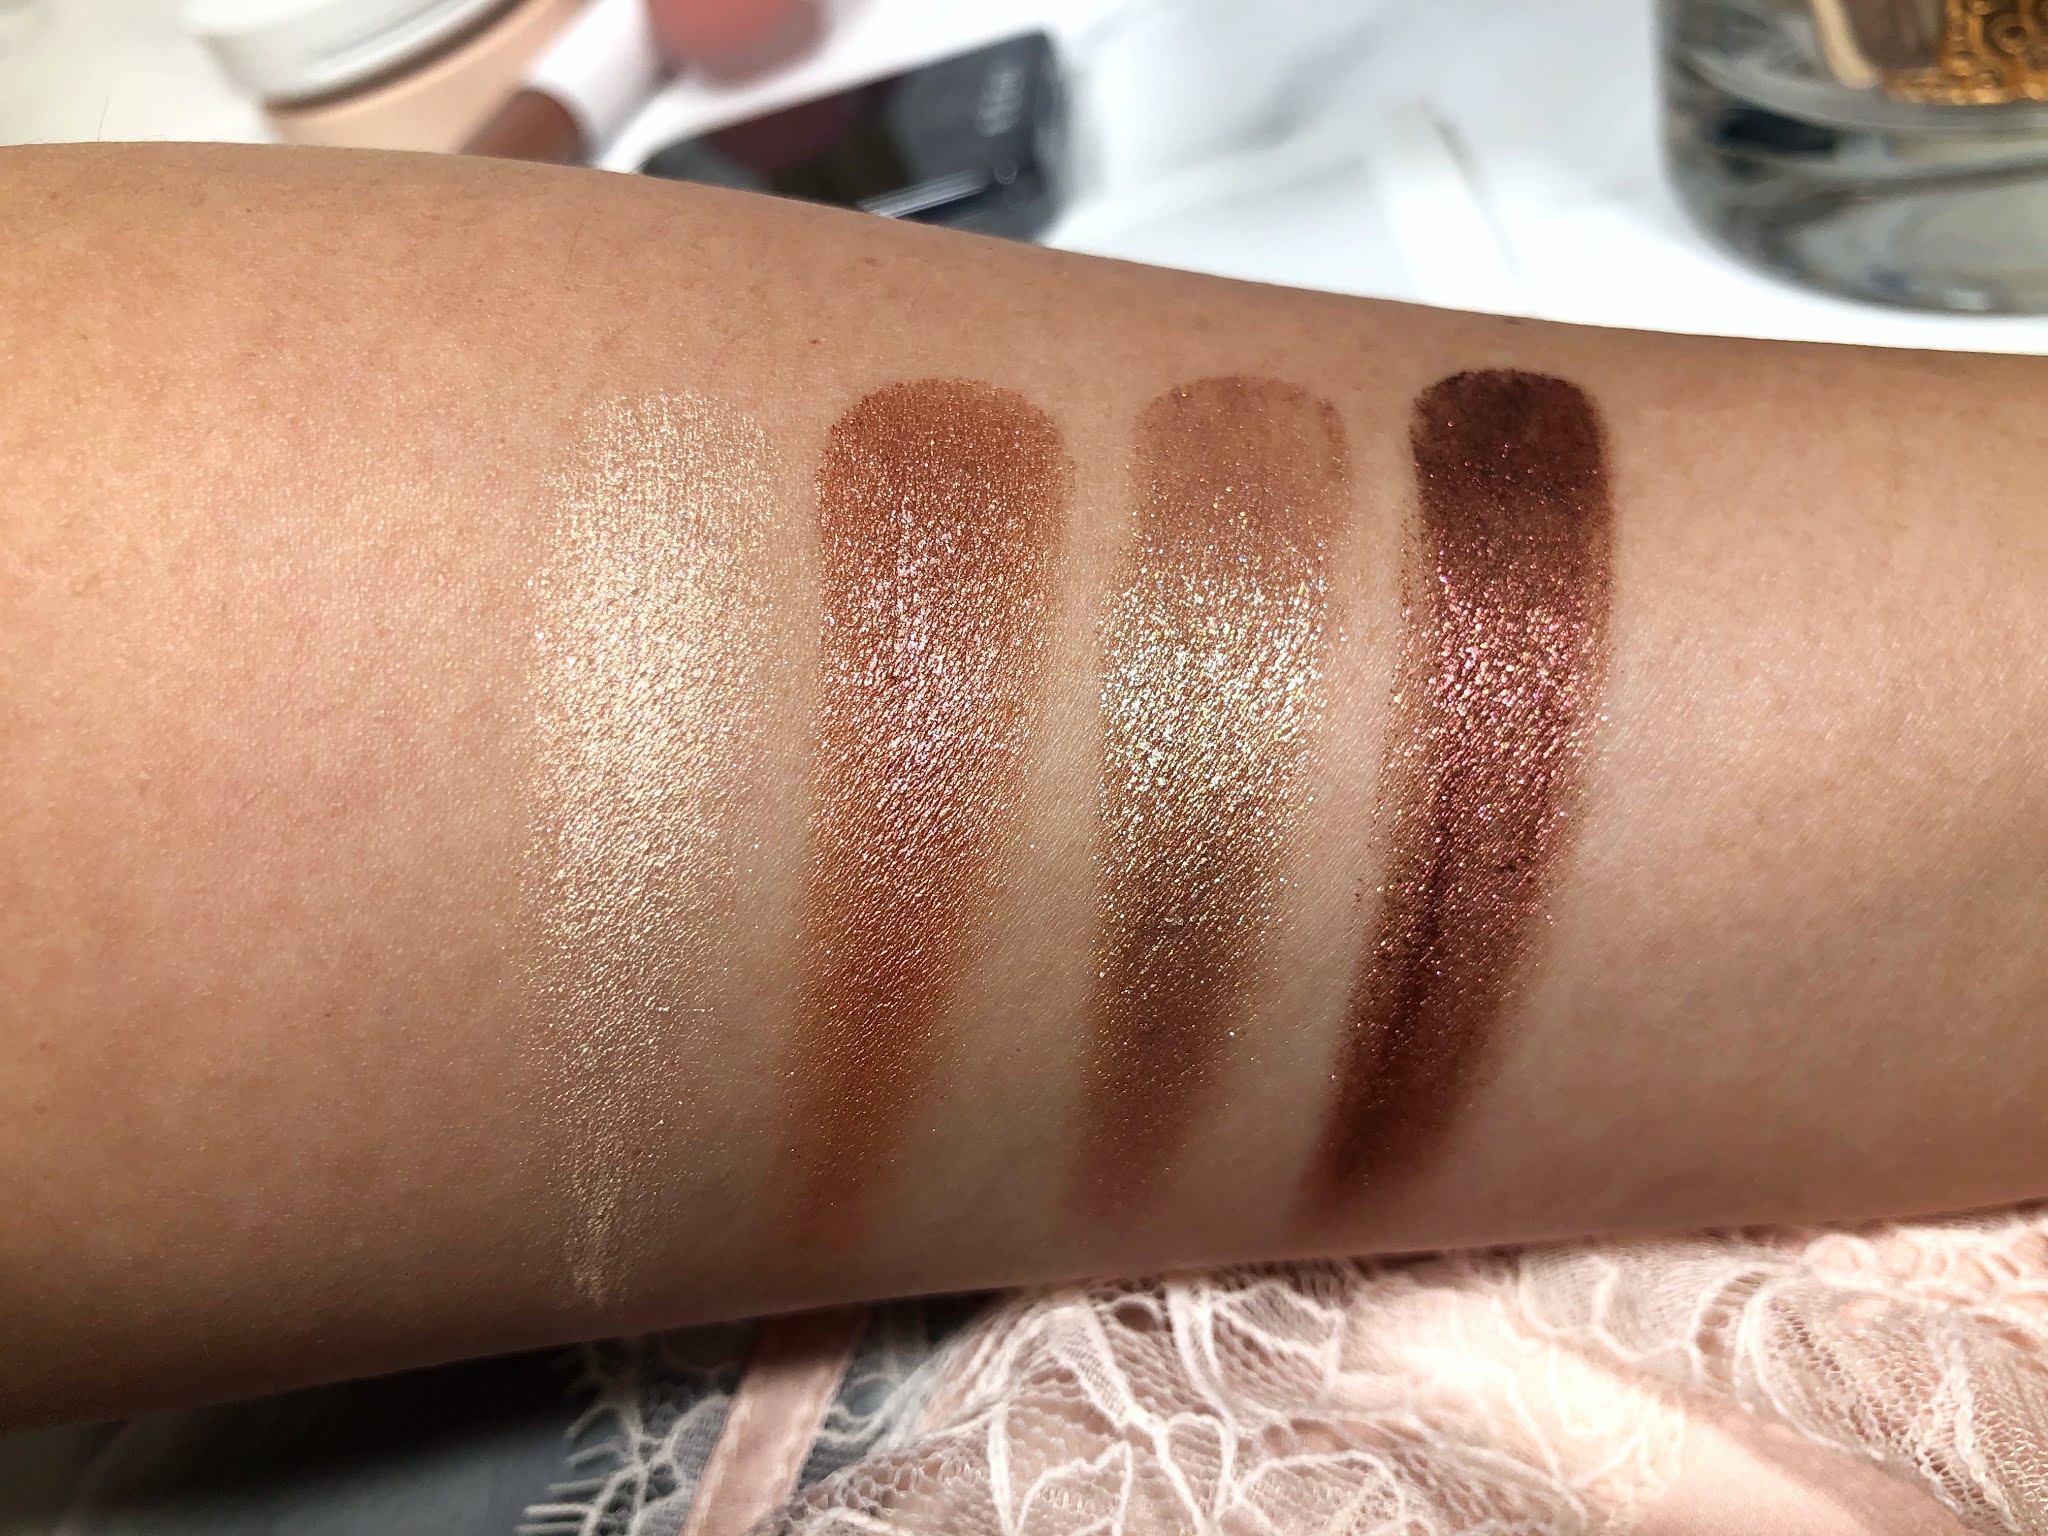 RÓEN Beauty Mood 4 Ever Eye Shadow Palette Review and Swatches